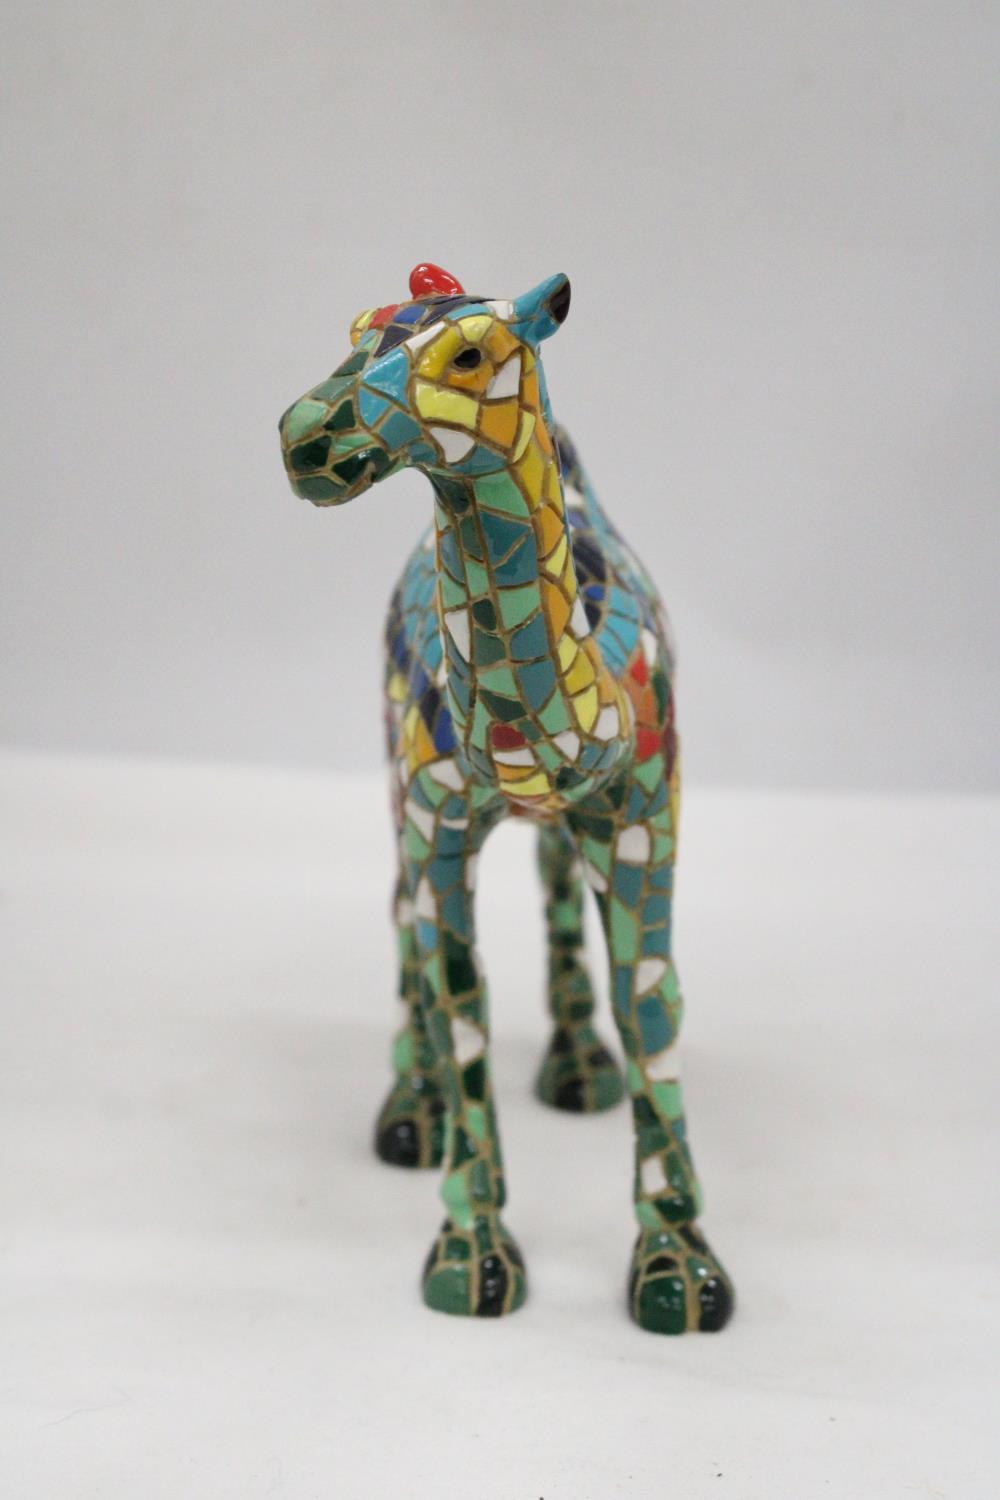 A HANDMADE SPANISH STONE CAMEL MOSAIC BY BARCINOS APPROXIMATELY 18CM HIGH - Image 2 of 5